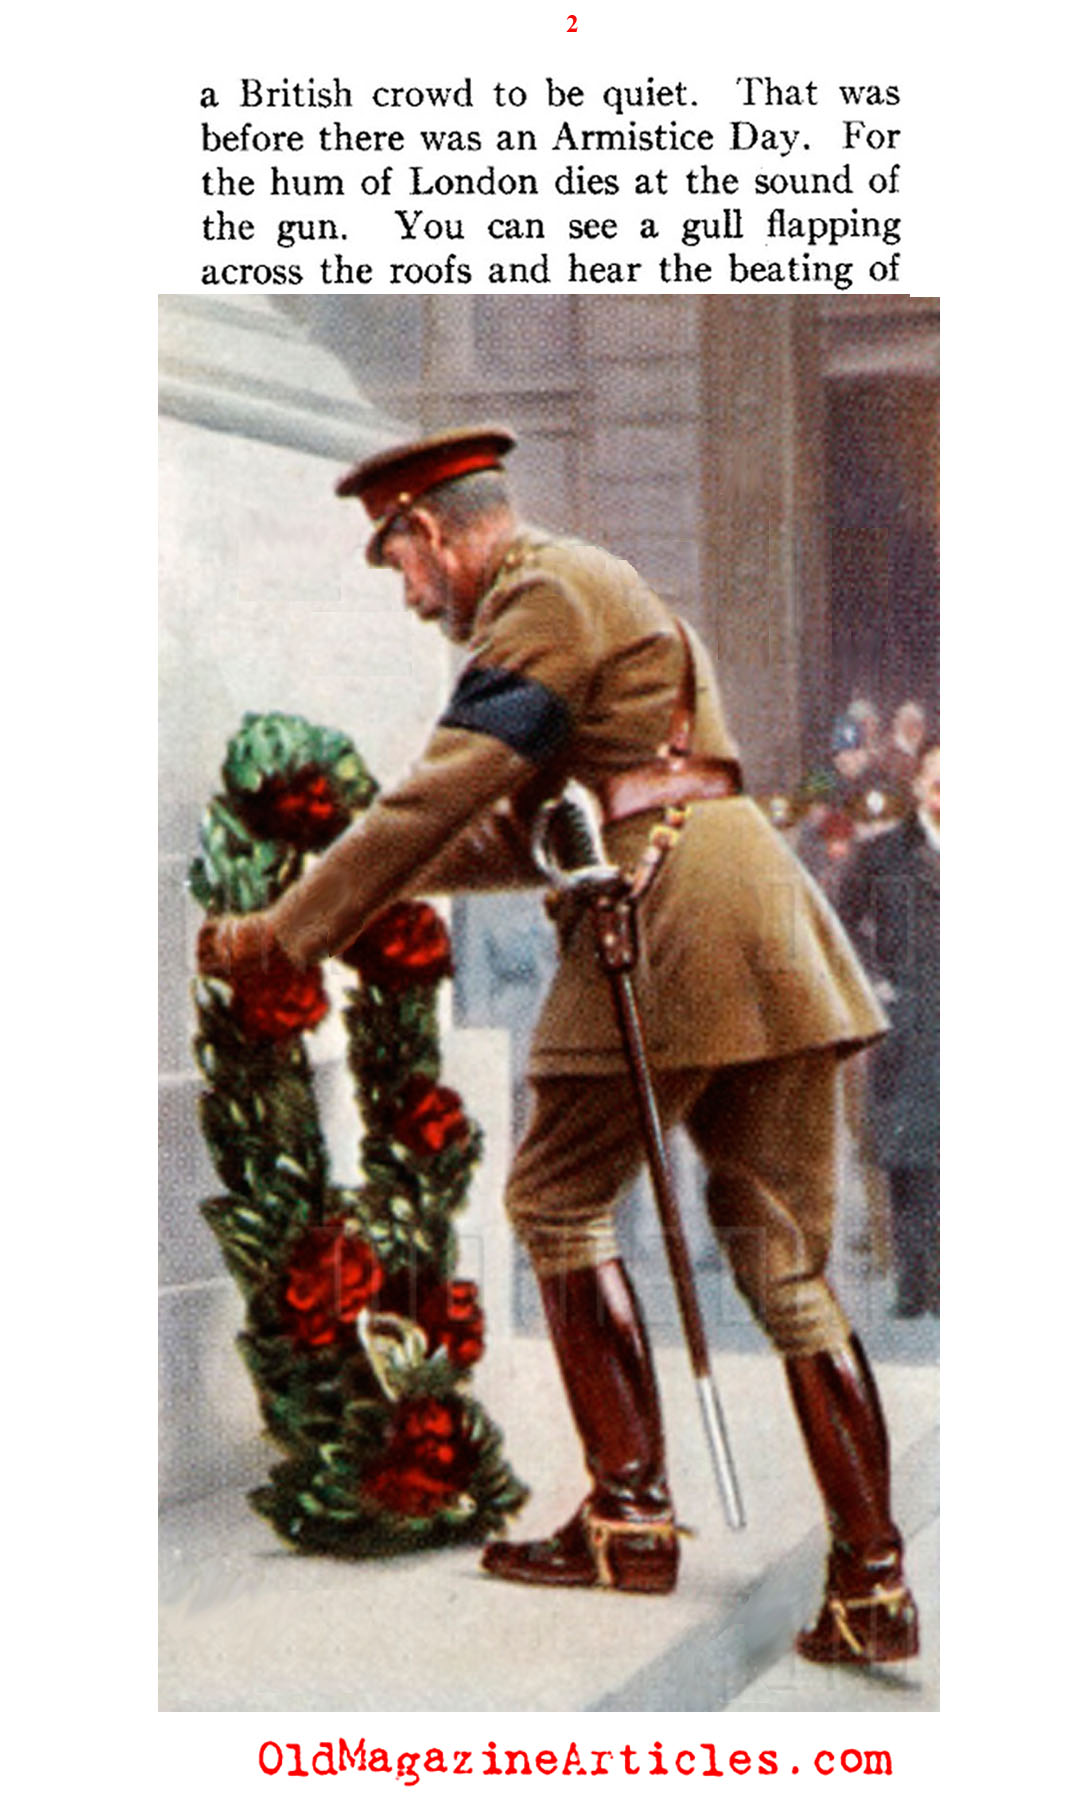 Remembrance Day at the Cenotaph (American Legion Monthly, 1936)